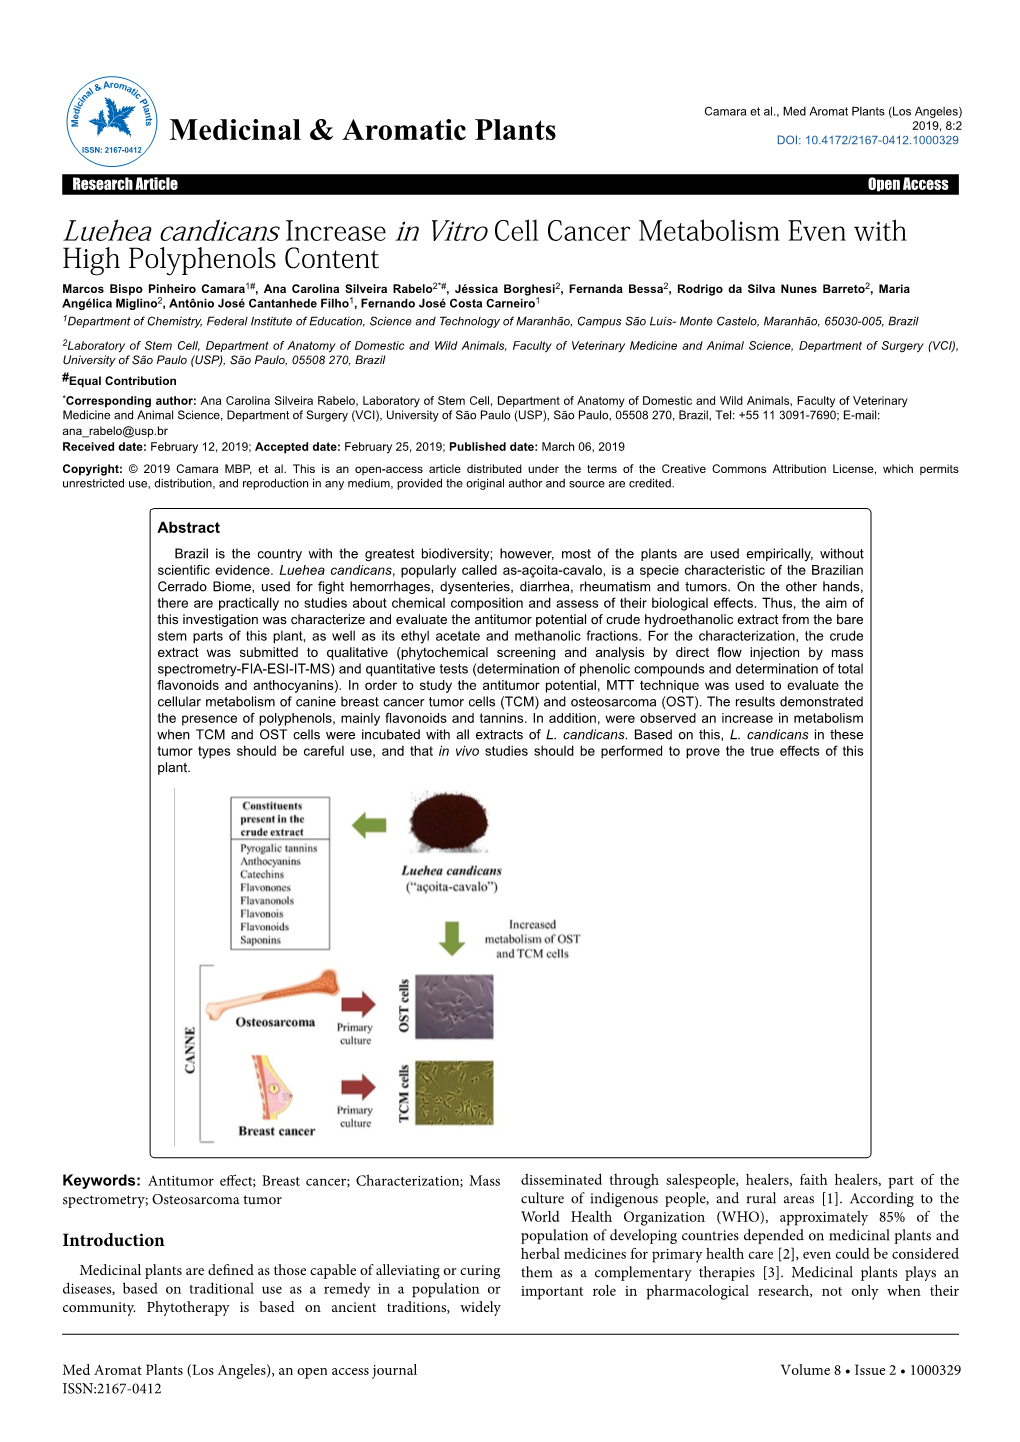 Luehea Candicans Increase in Vitro Cell Cancer Metabolism Even With